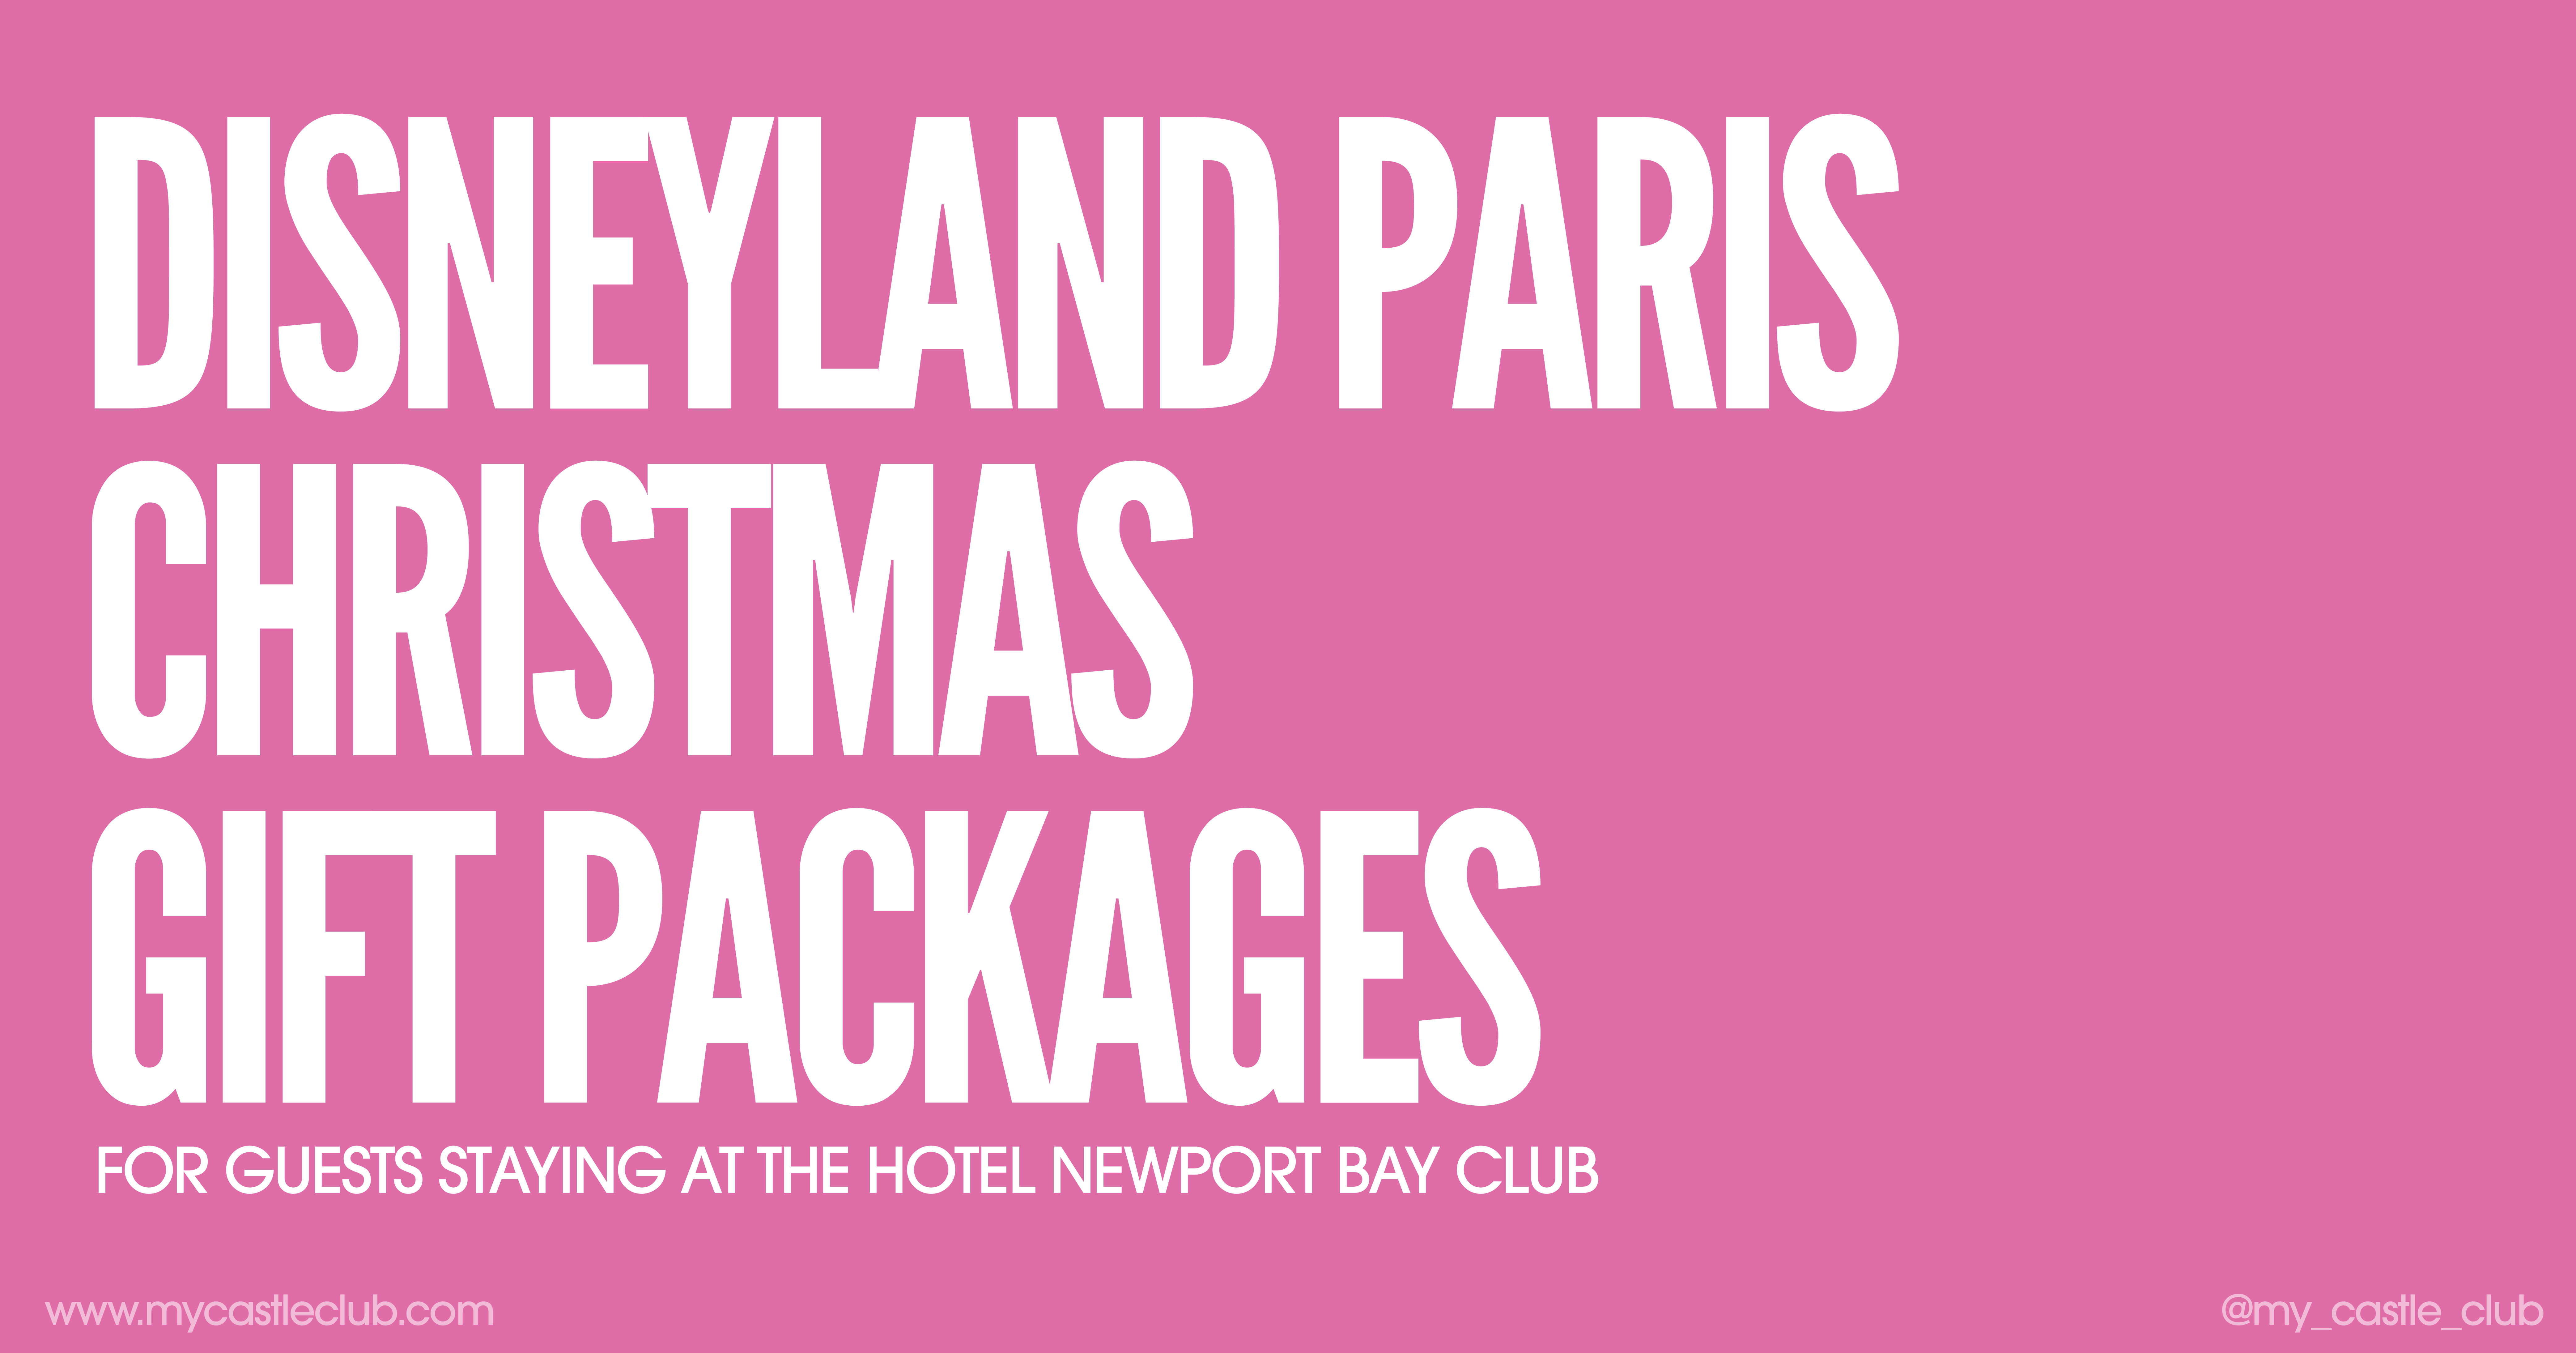 Christmas Room Packages & Presents available for Disneys Newport Bay Club Guests at Disneyland Paris